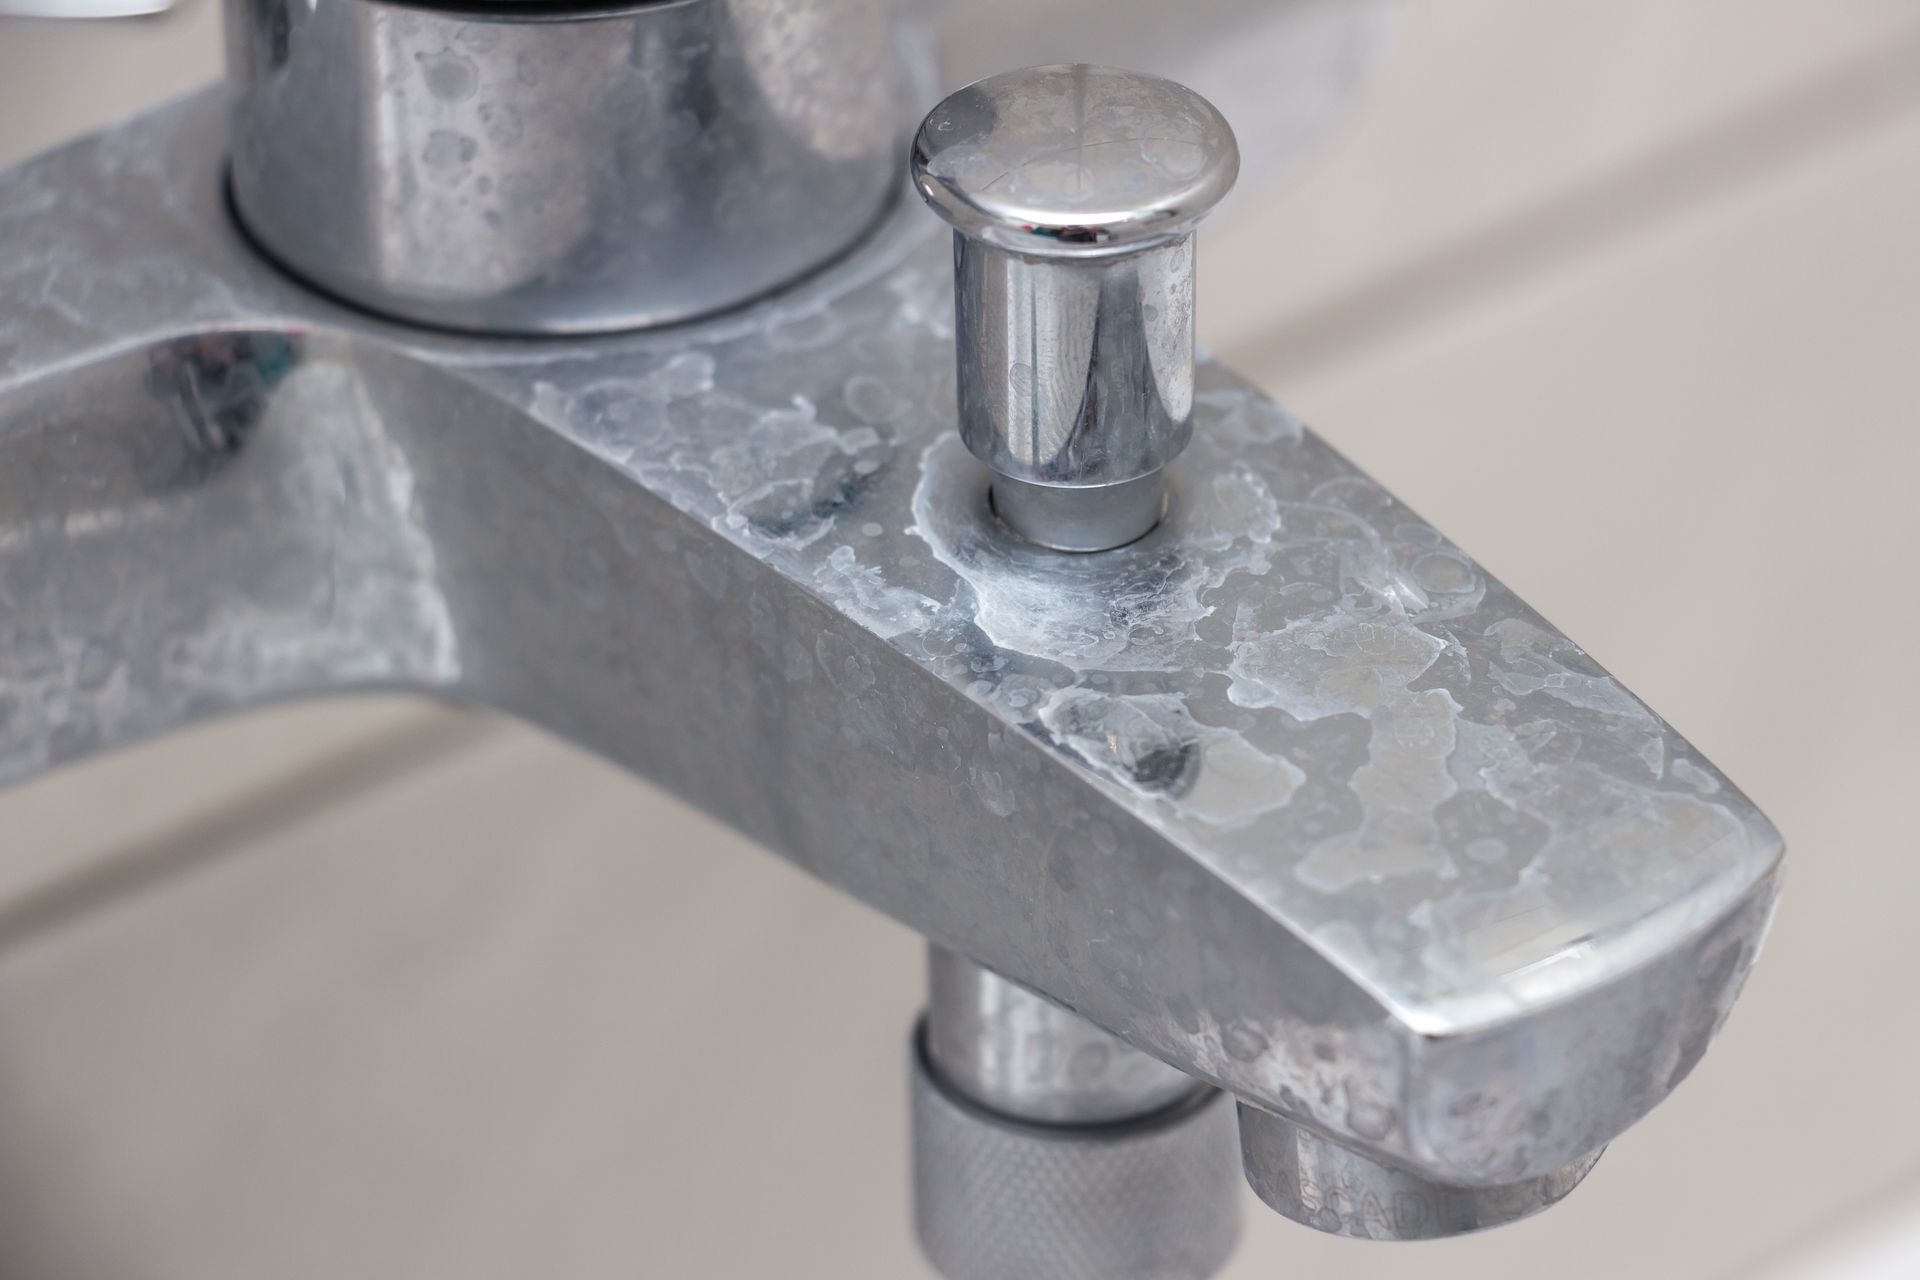 faucet with hard water